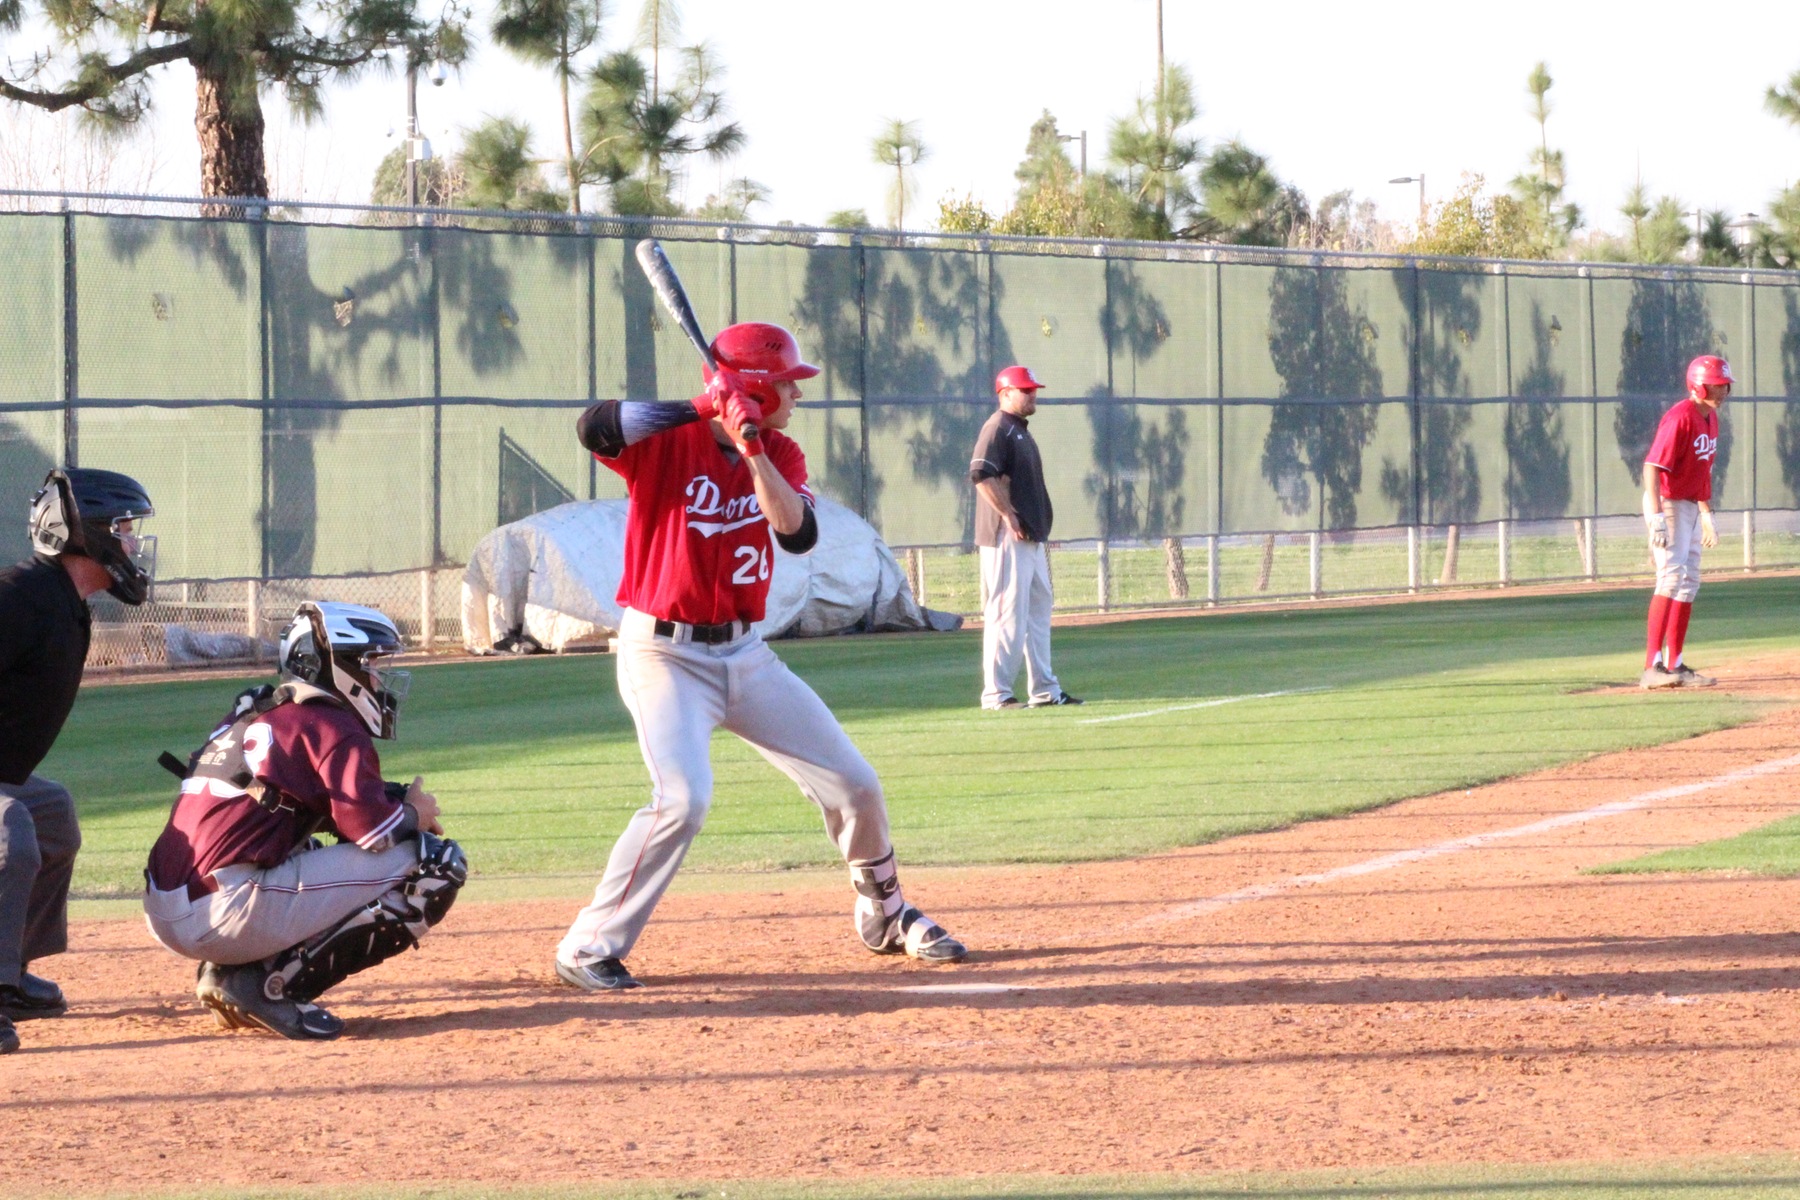 Defensive Miscues Prove Costly for the Dons in 13-10 Loss to Mt. SAC